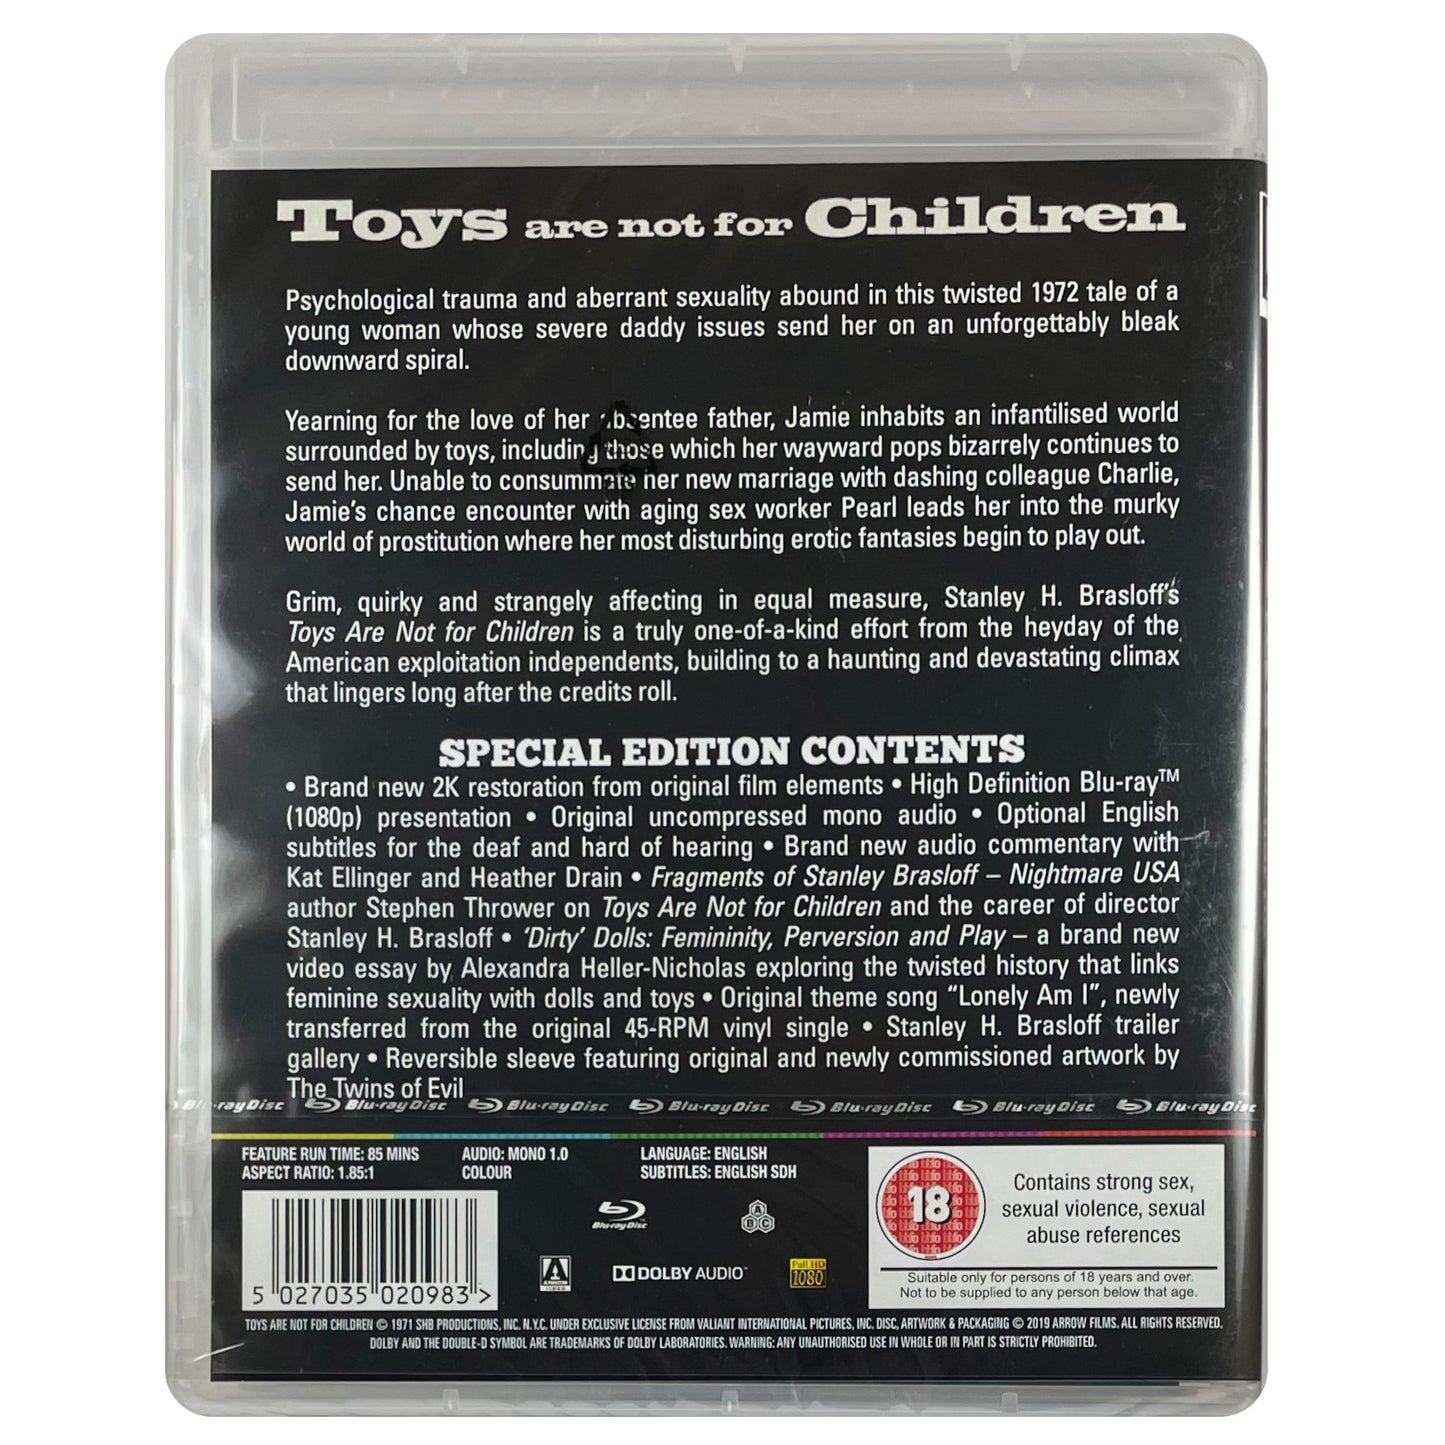 Toys Are Not for Children Blu-Ray